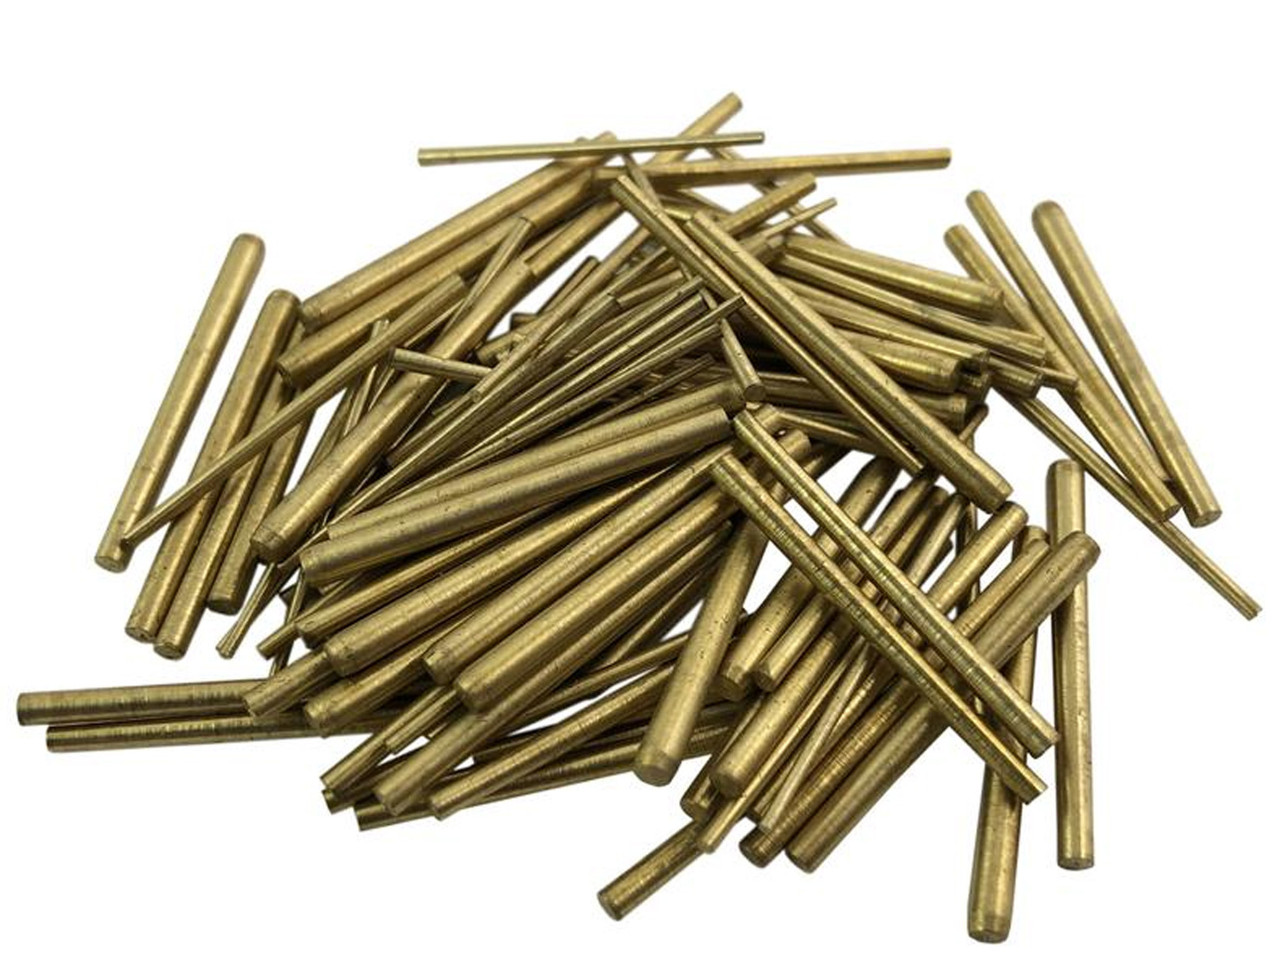 Assorted Tapered Brass Pins for Watch Bands Repair - 100 Pcs